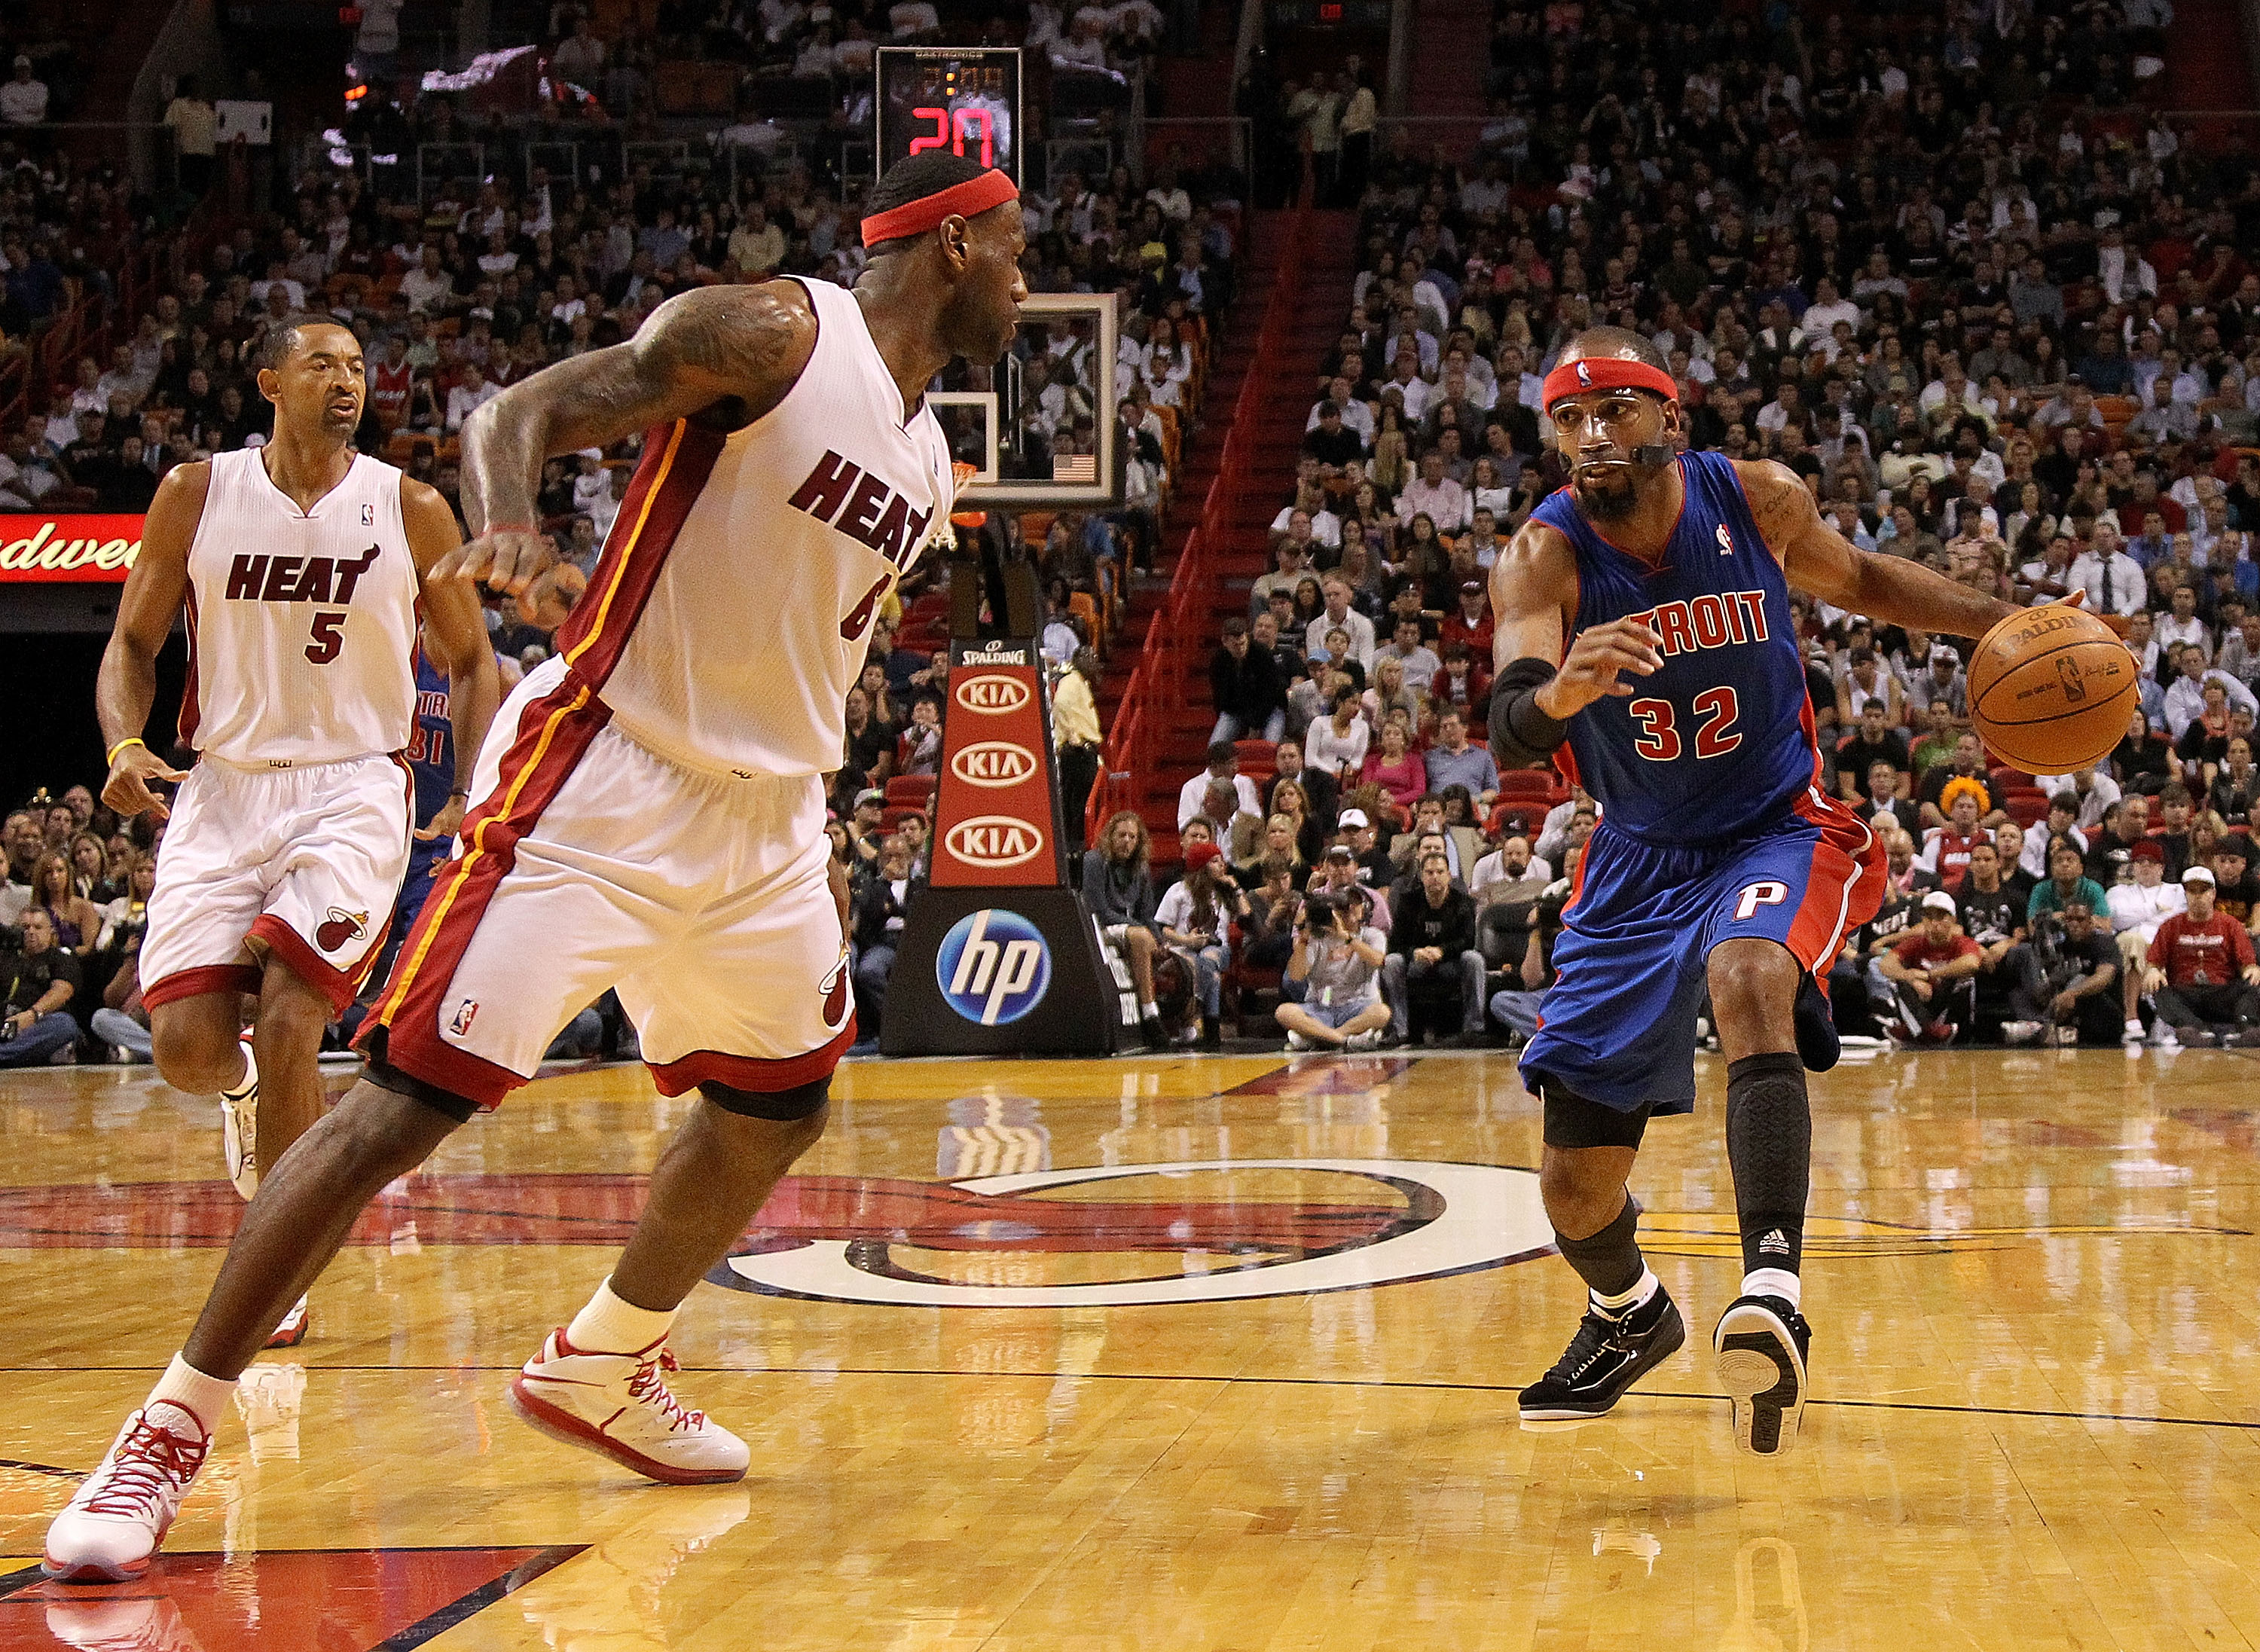 MIAMI, FL - DECEMBER 01:  Richard Hamilton #32 of the Detroit Pistons dribbles around LeBron James #6 of the Miami Heat during a game at American Airlines Arena on December 1, 2010 in Miami, Florida. NOTE TO USER: User expressly acknowledges and agrees th